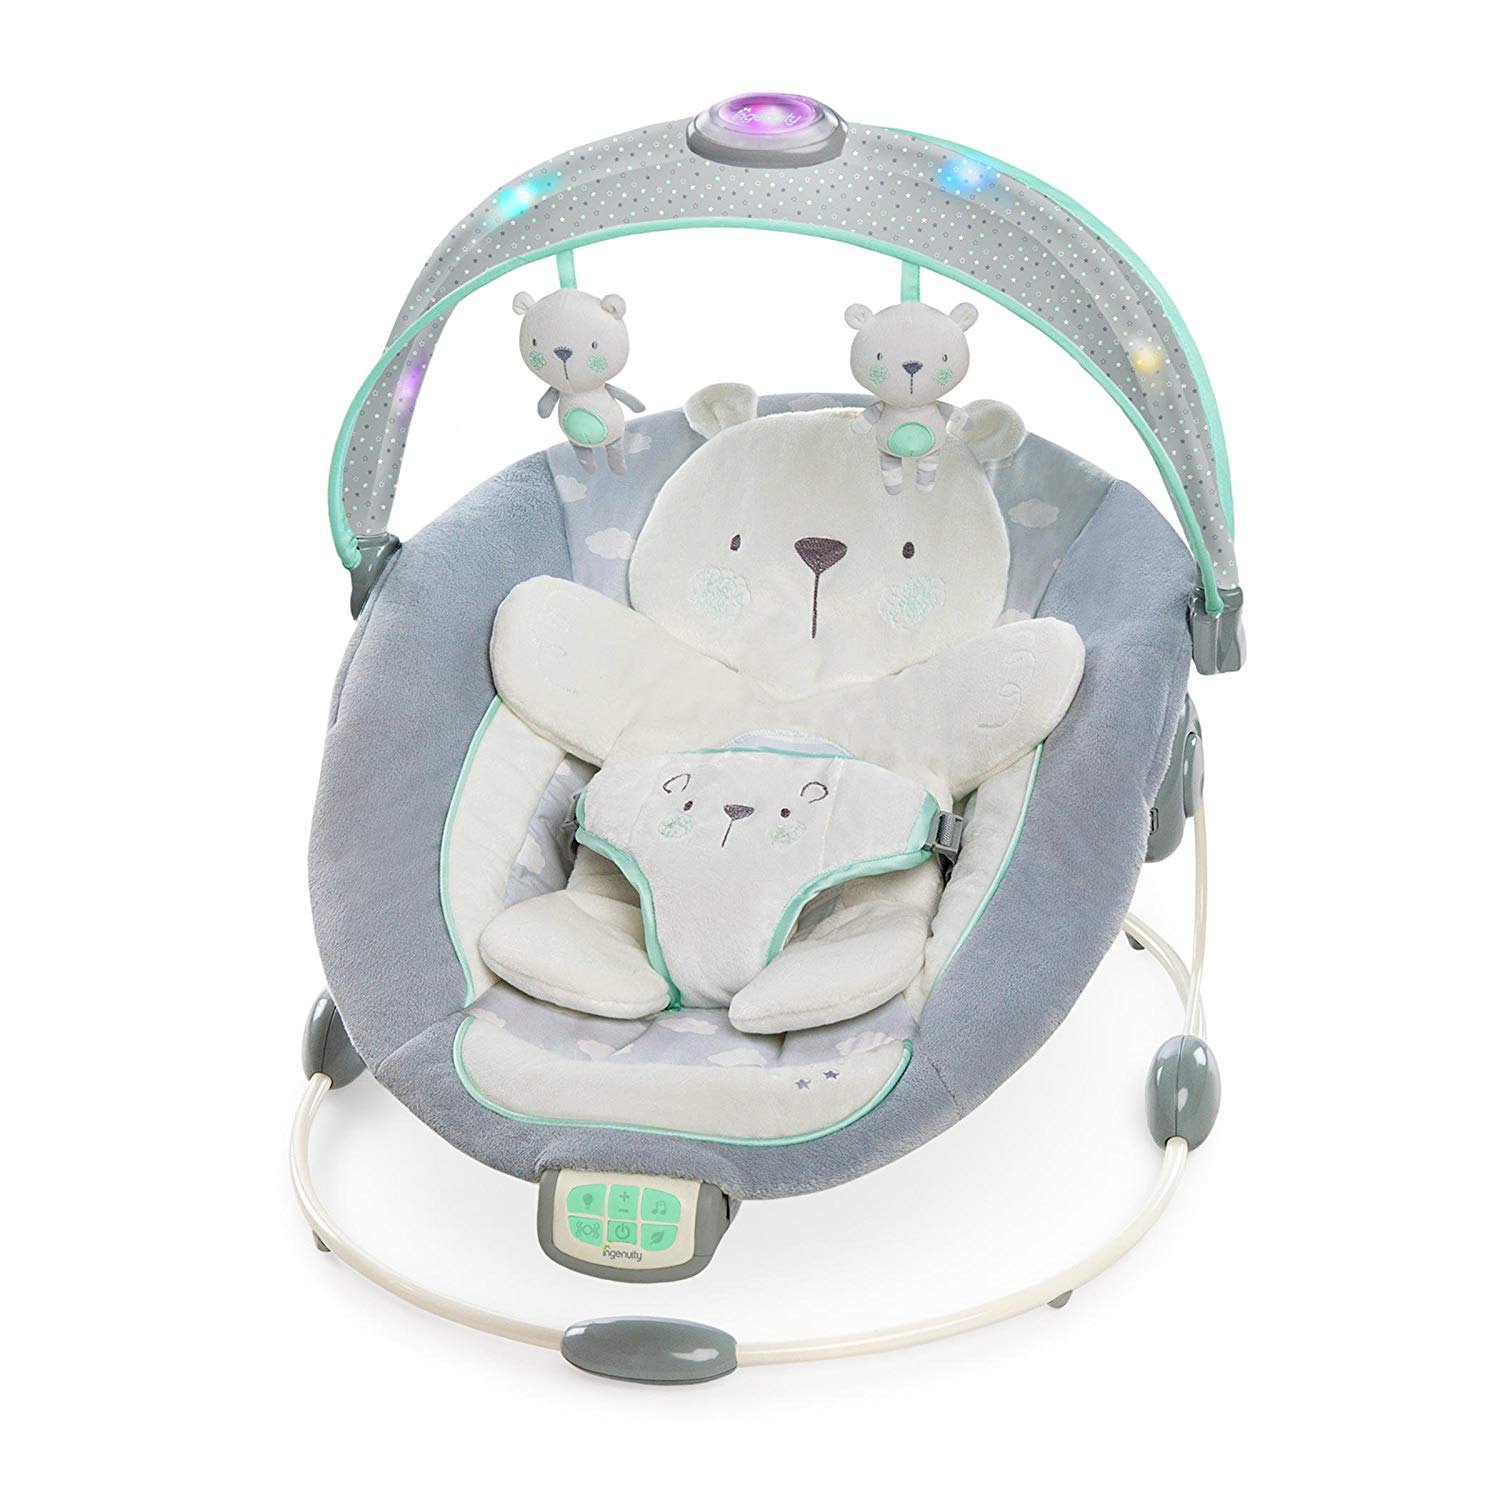 Ingenuity baby bouncer with lights, teddy